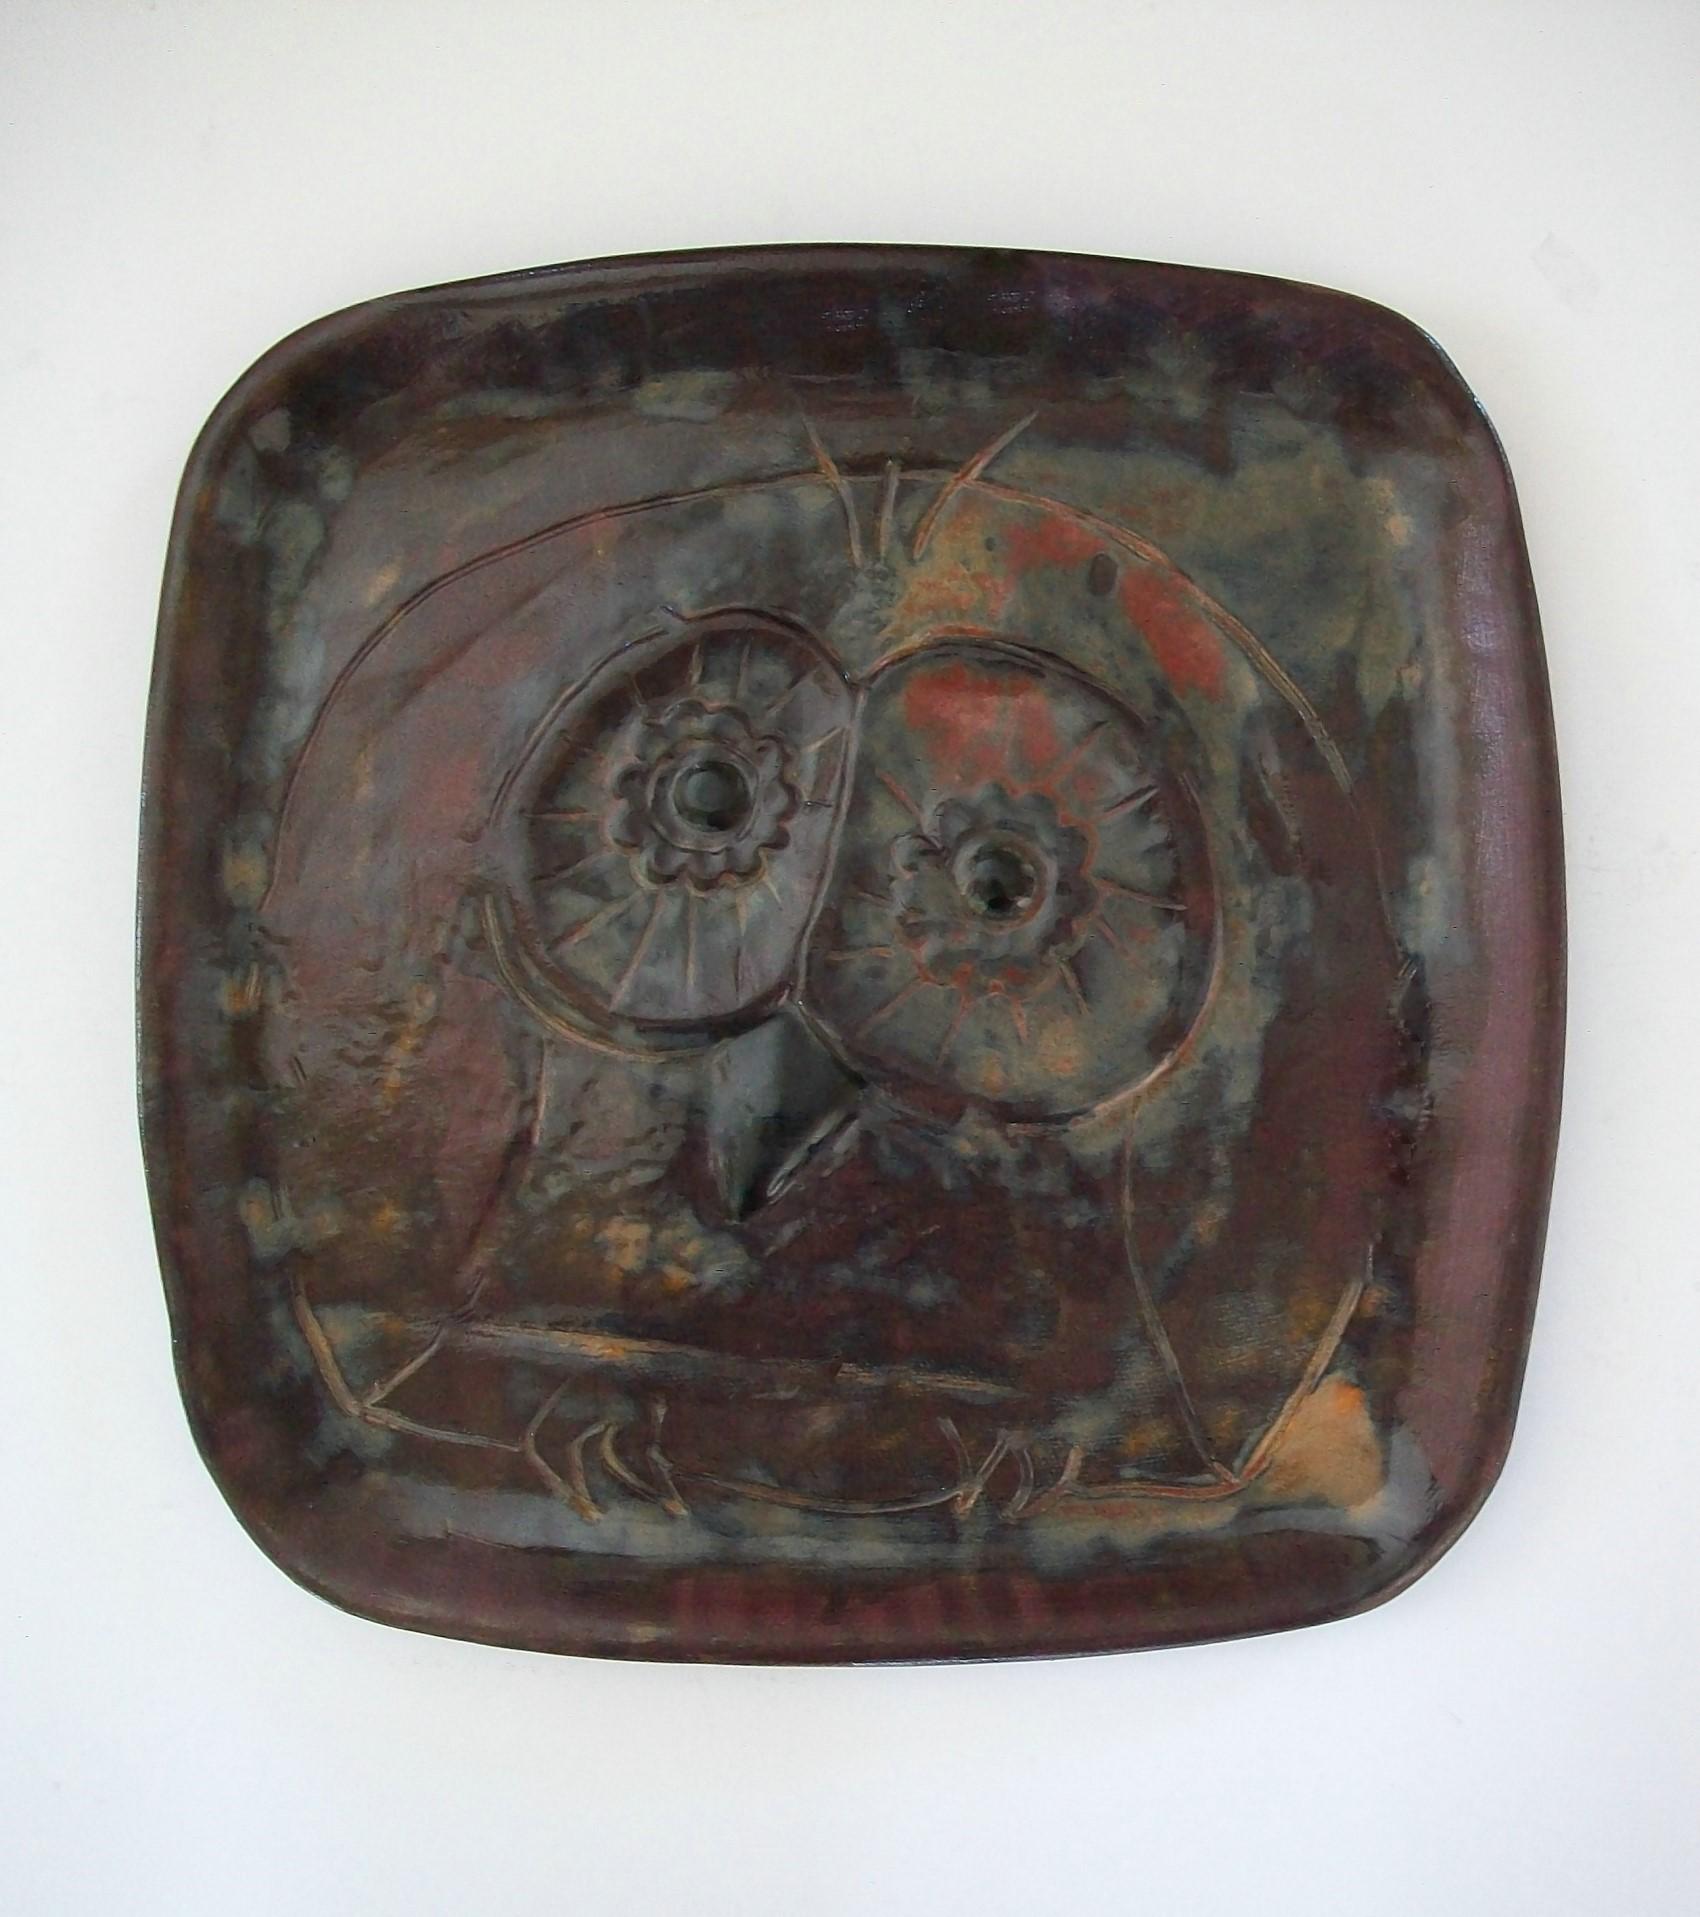 LINDA LEIGH - Studio Pottery 'owl' platter - featuring an incised design with multi color glazed finish - signed on the base - Canada (Chatham, Ontario) - 21st century.

Excellent / mint pre-owned condition - minor scuffs to the base - no loss -